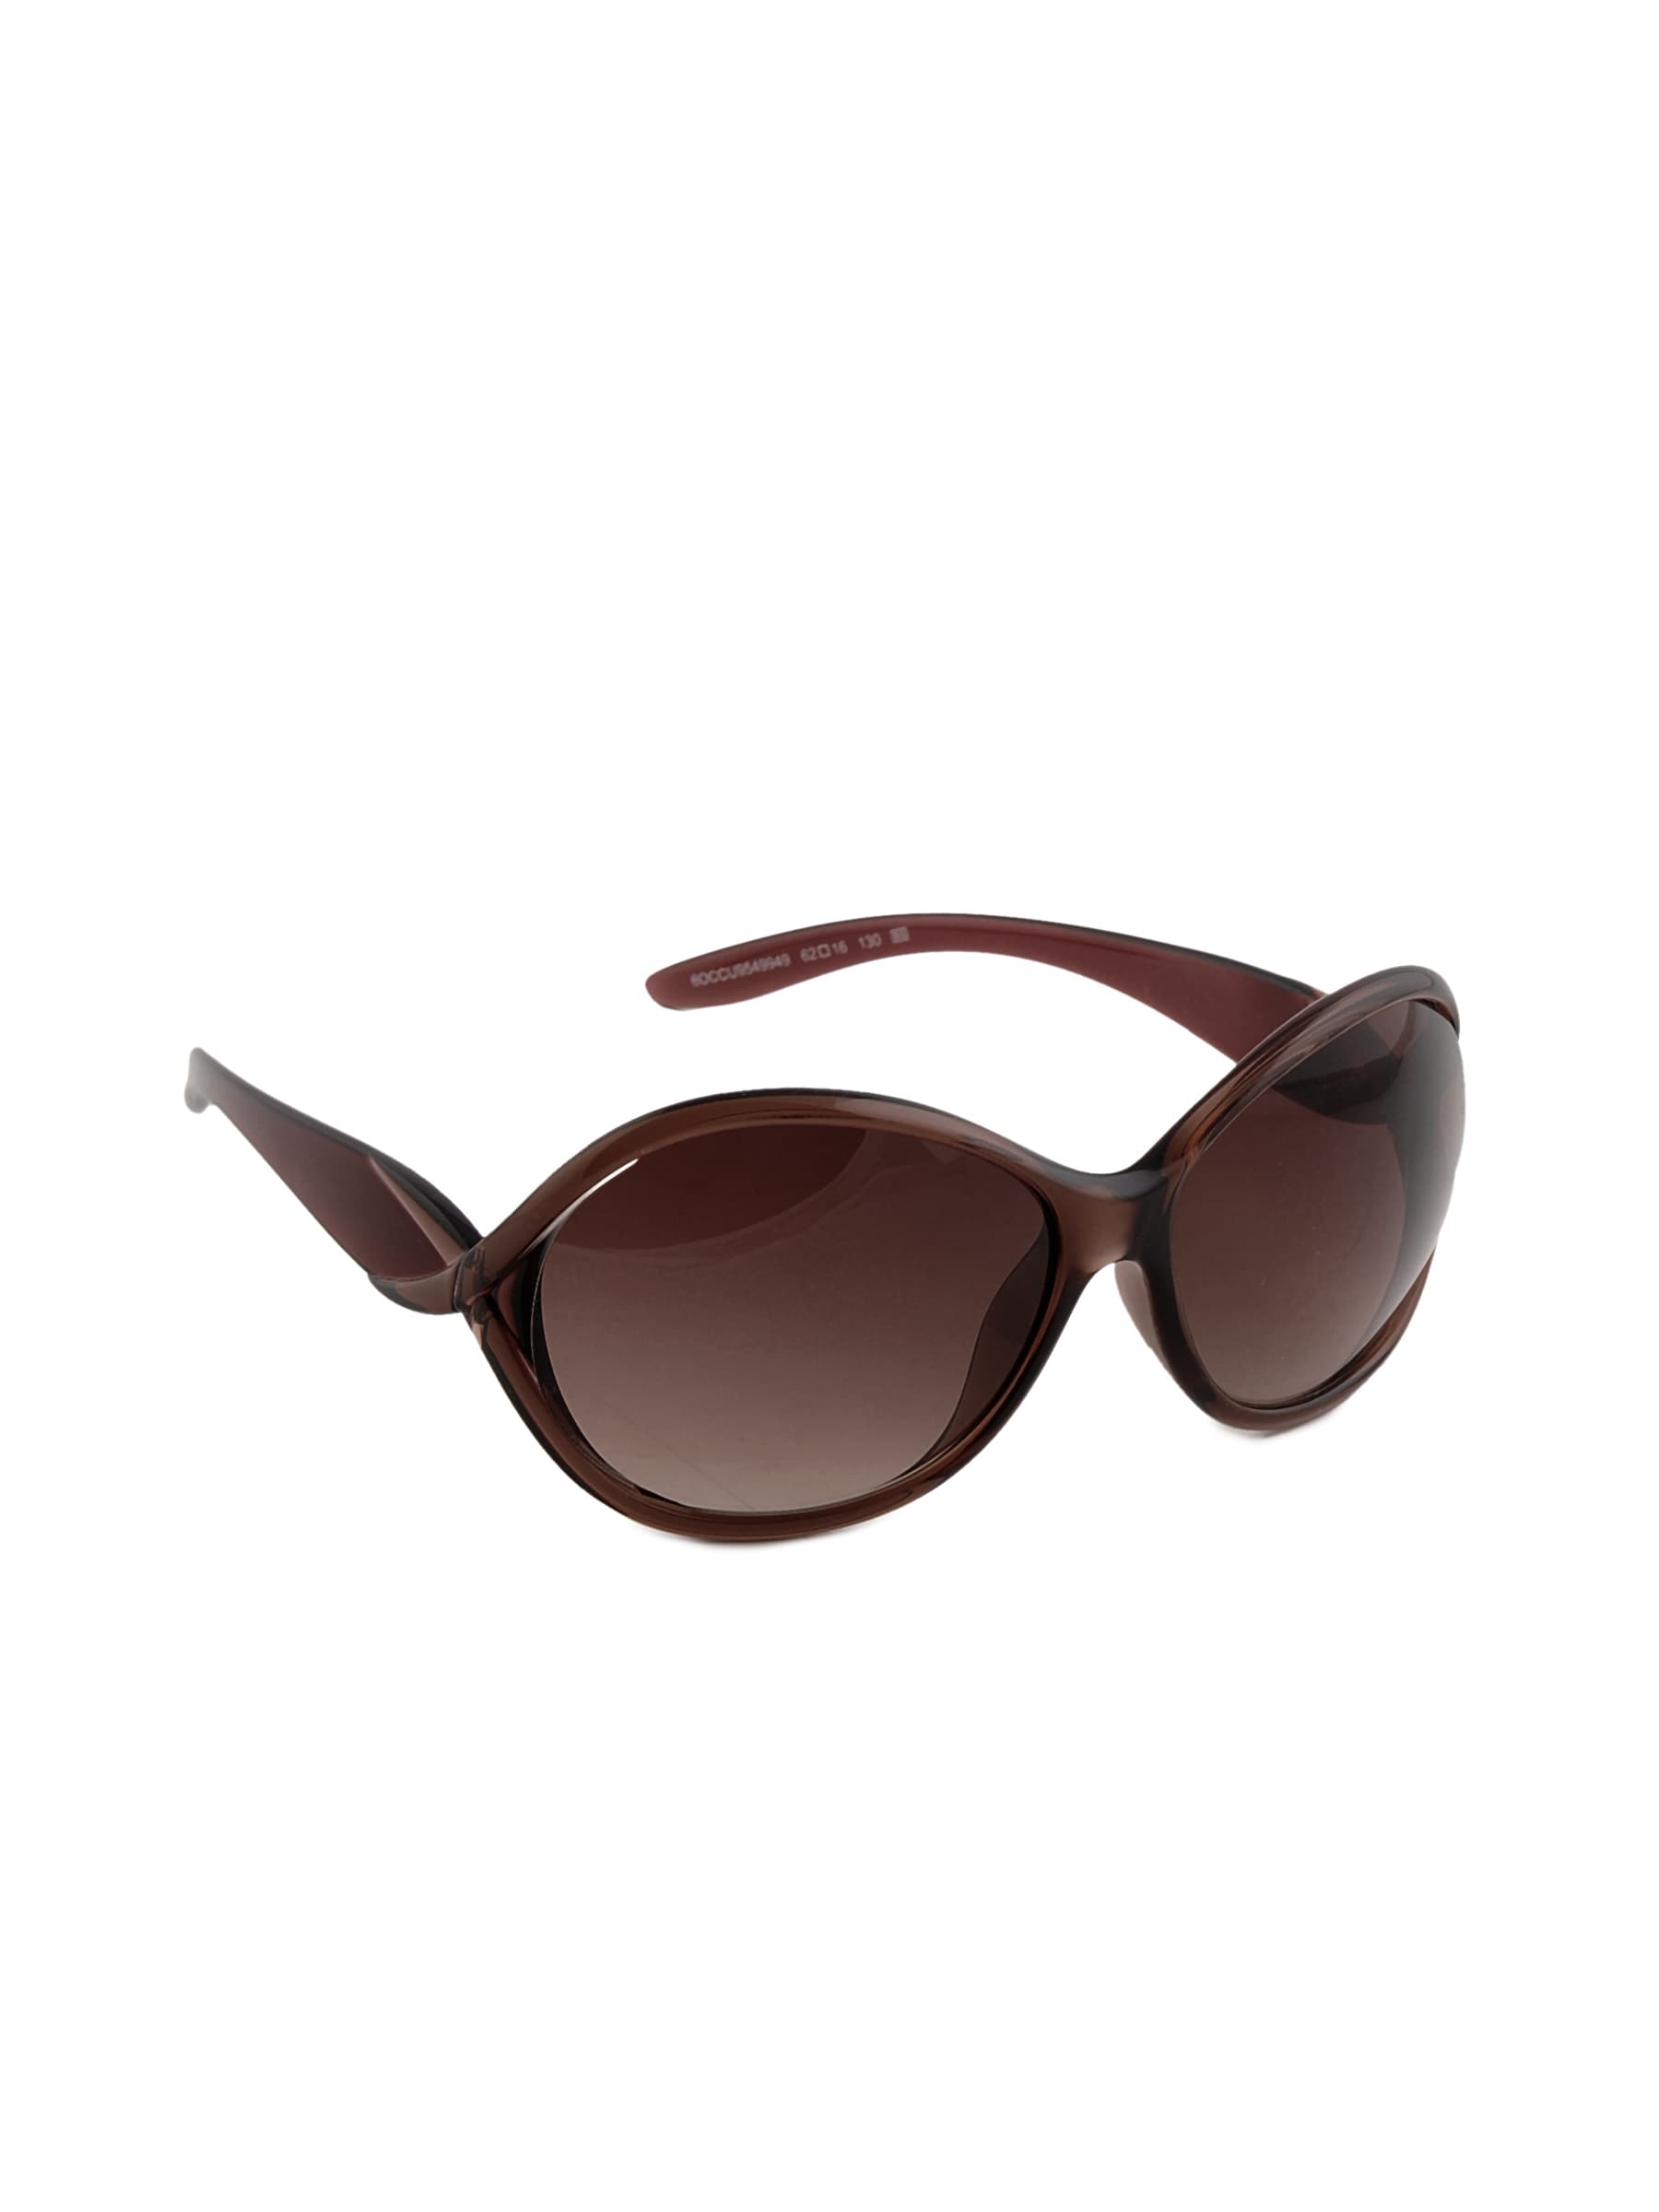 United Colors of Benetton Women Casual Olive Sunglasses